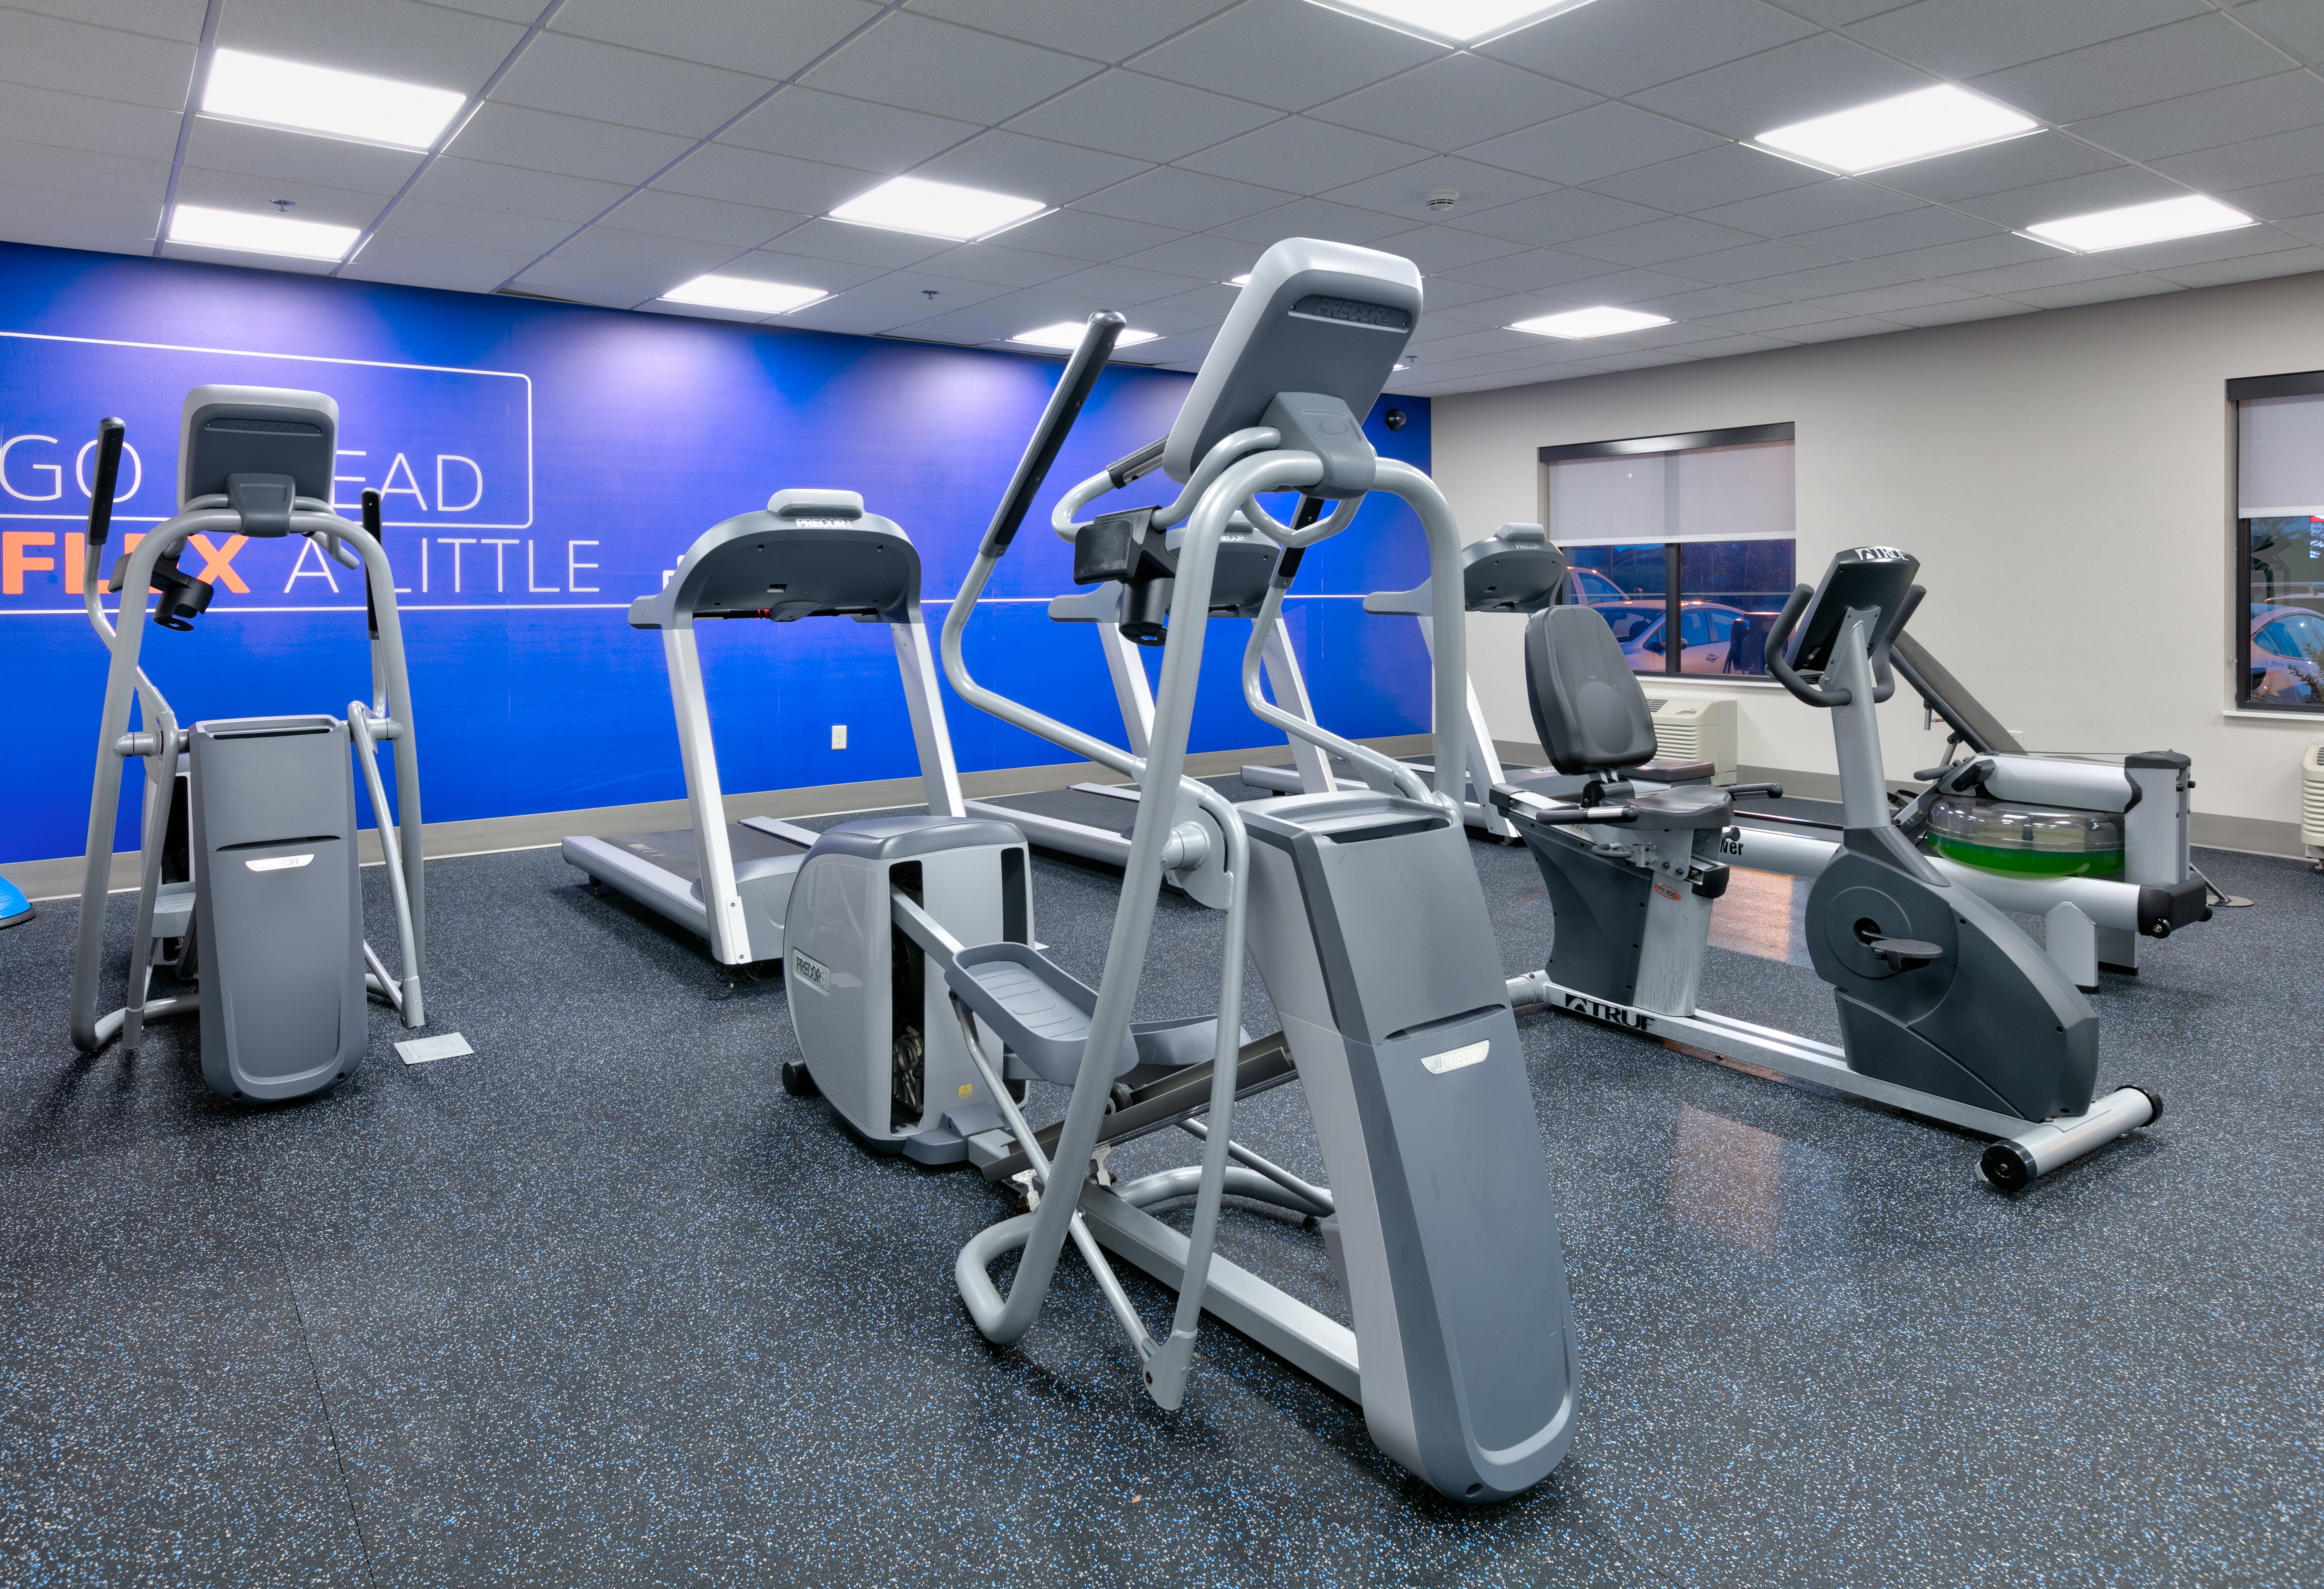 Start your morning with a workout in our fitness center.